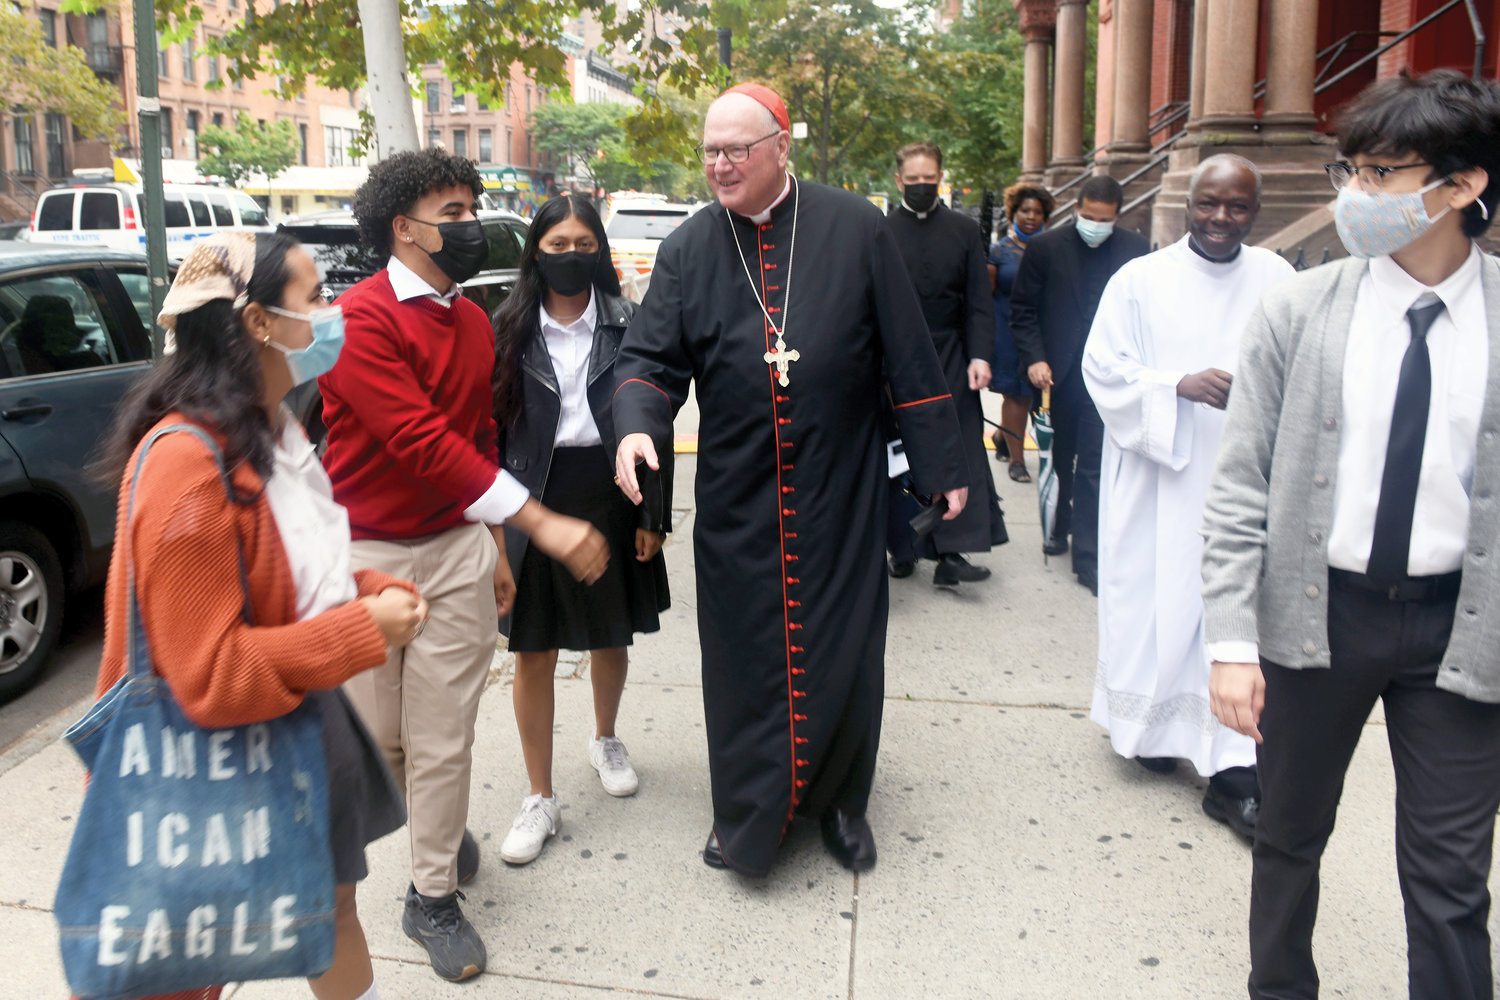 En route to tour the school after the Mass, the cardinal greets student ambassadors. Father Peter Mushi, pastor of St. Cecilia and Holy Agony, is to the right of the cardinal.